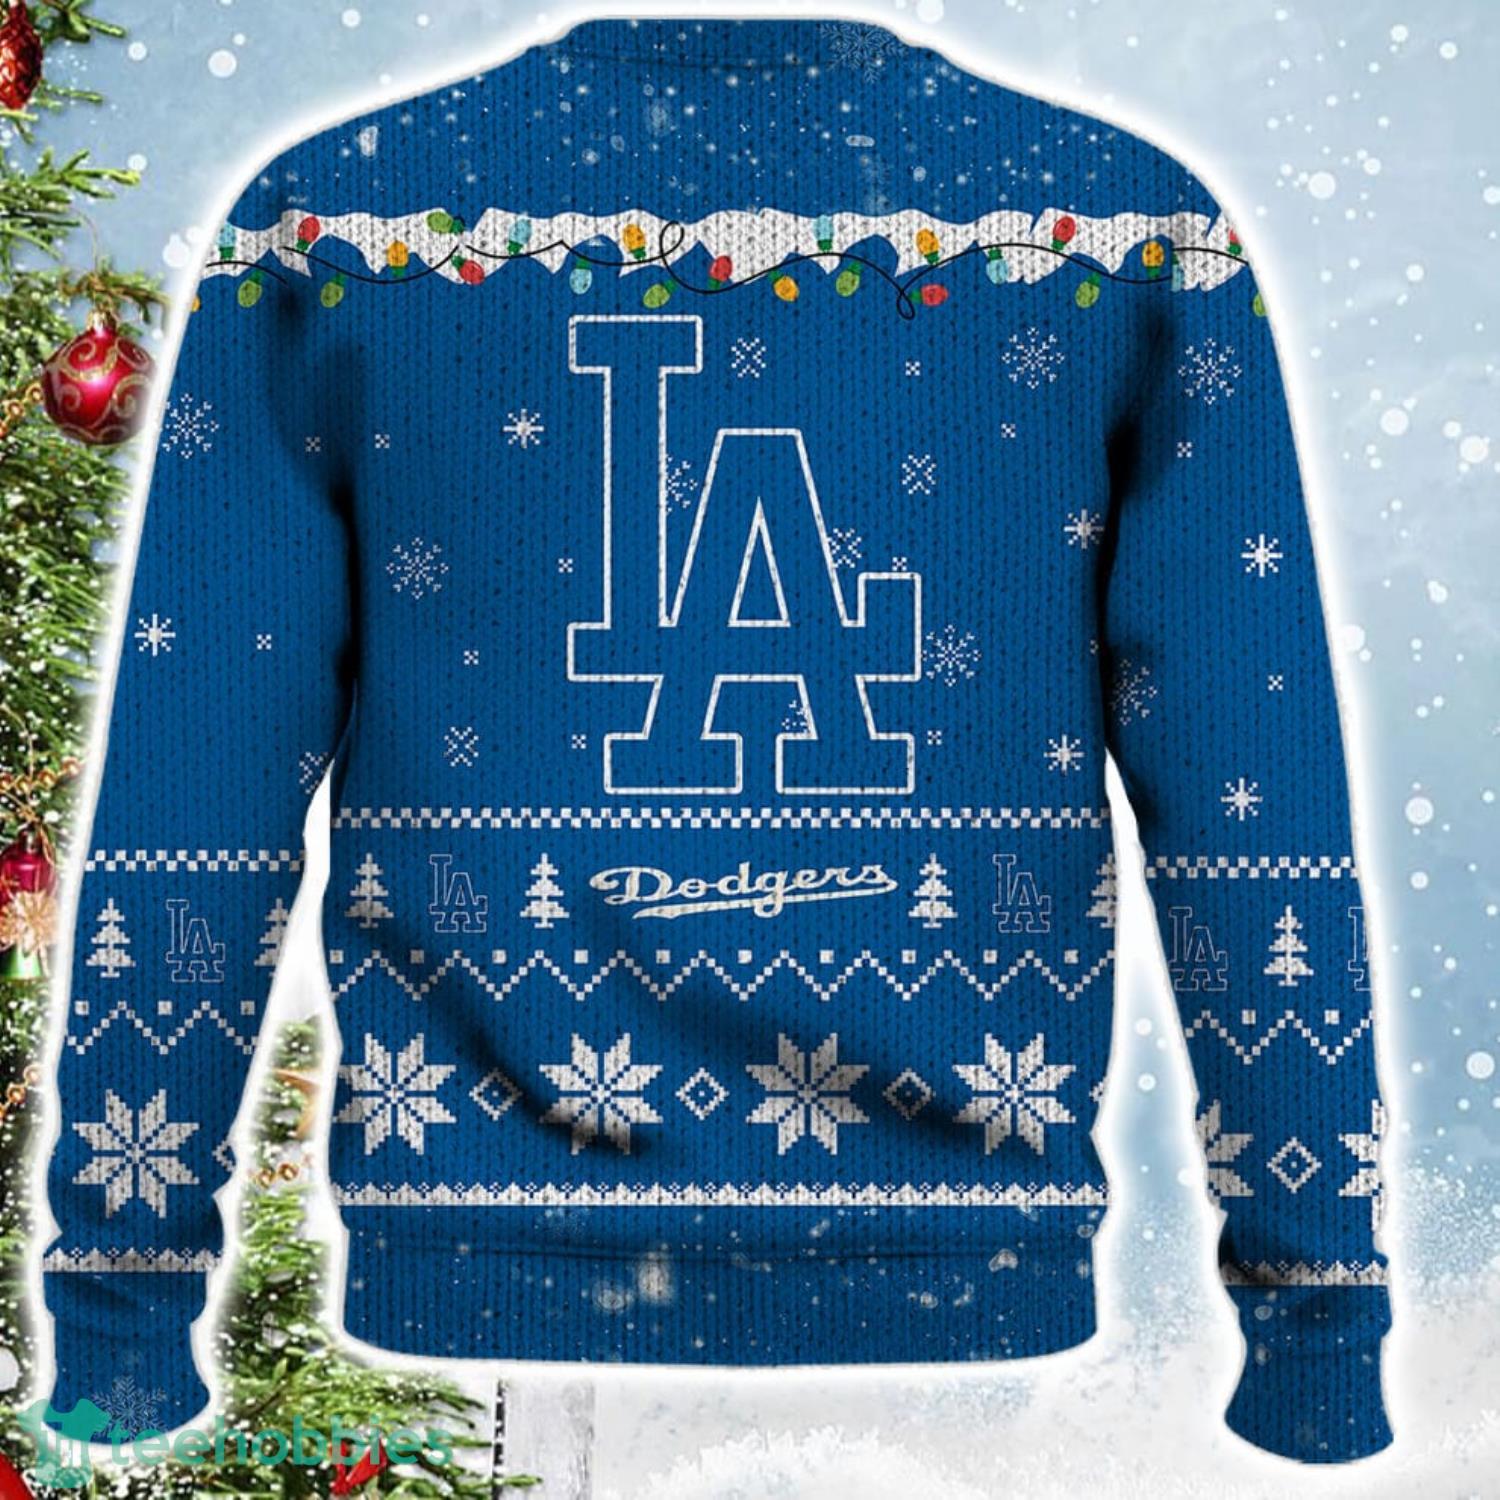 Los Angeles Dodgers Snoopy Christmas Light Woodstock Snoopy Ugly Christmas Sweater Product Photo 3